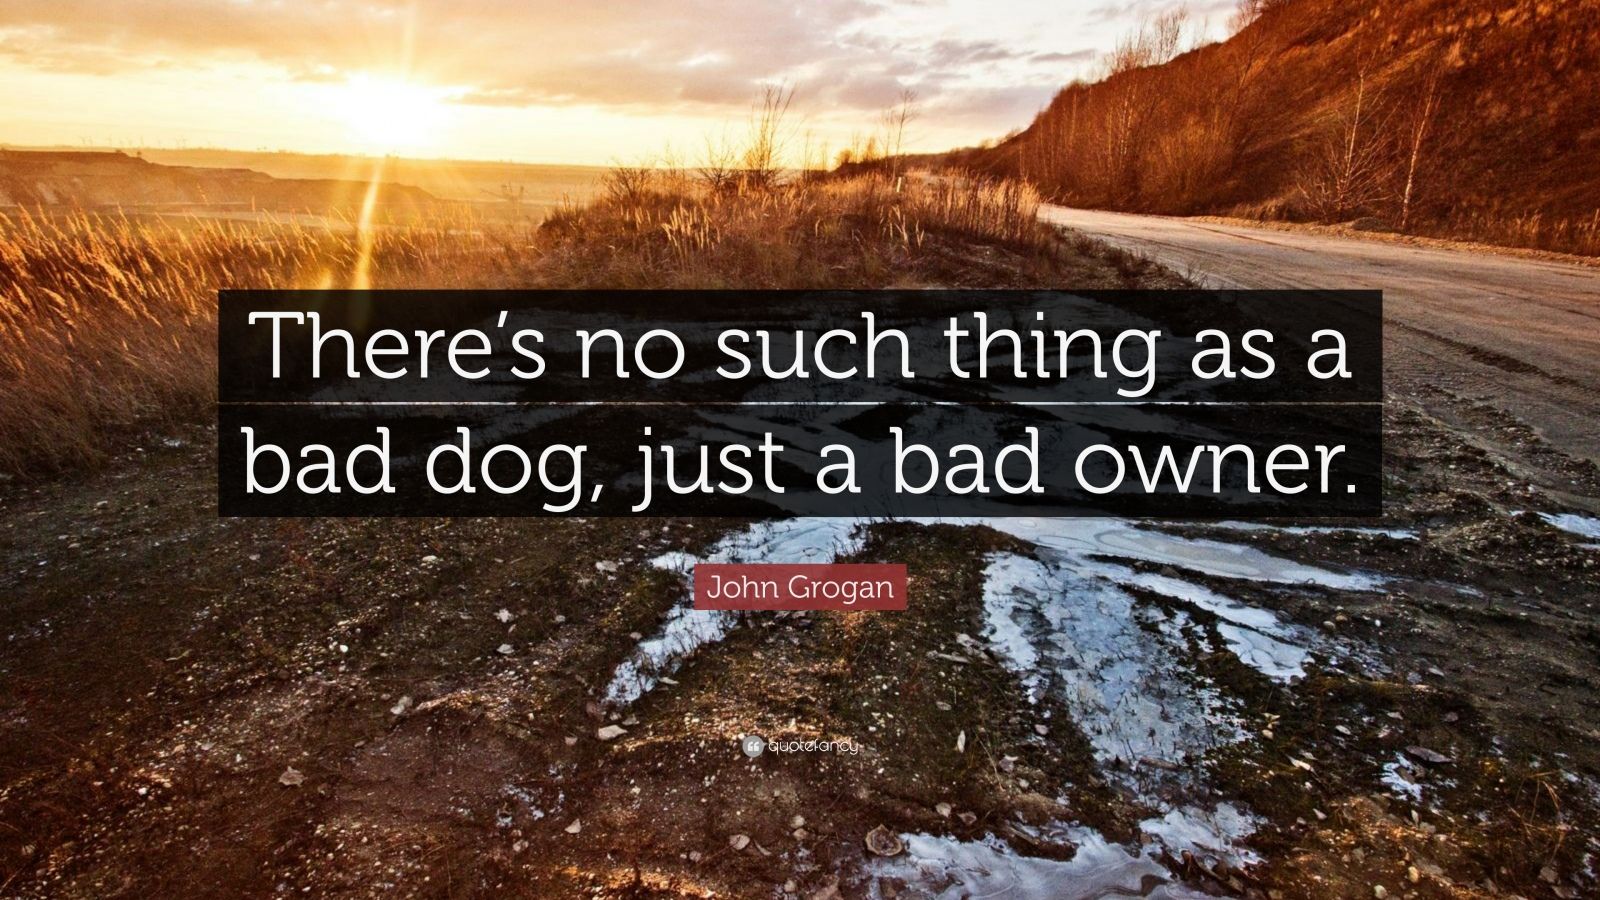 John Grogan Quote: “There’s no such thing as a bad dog, just a bad